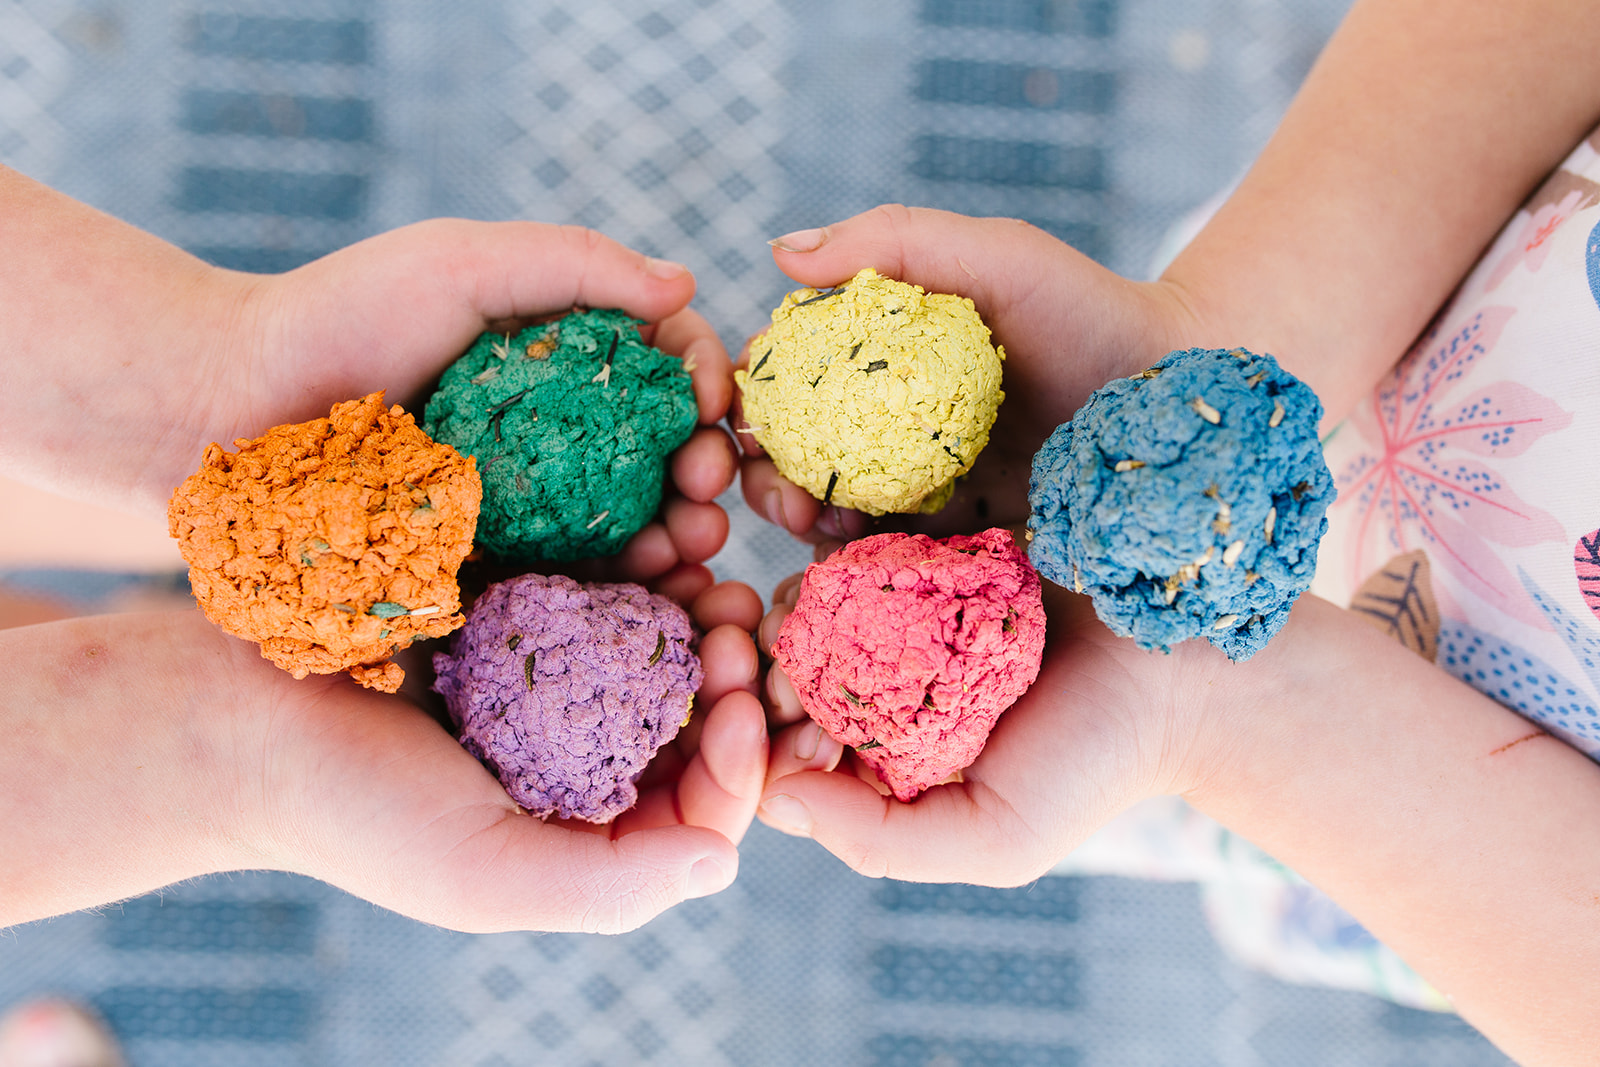 Small hands holding out six colorful seed bombs made out of recycled paper.